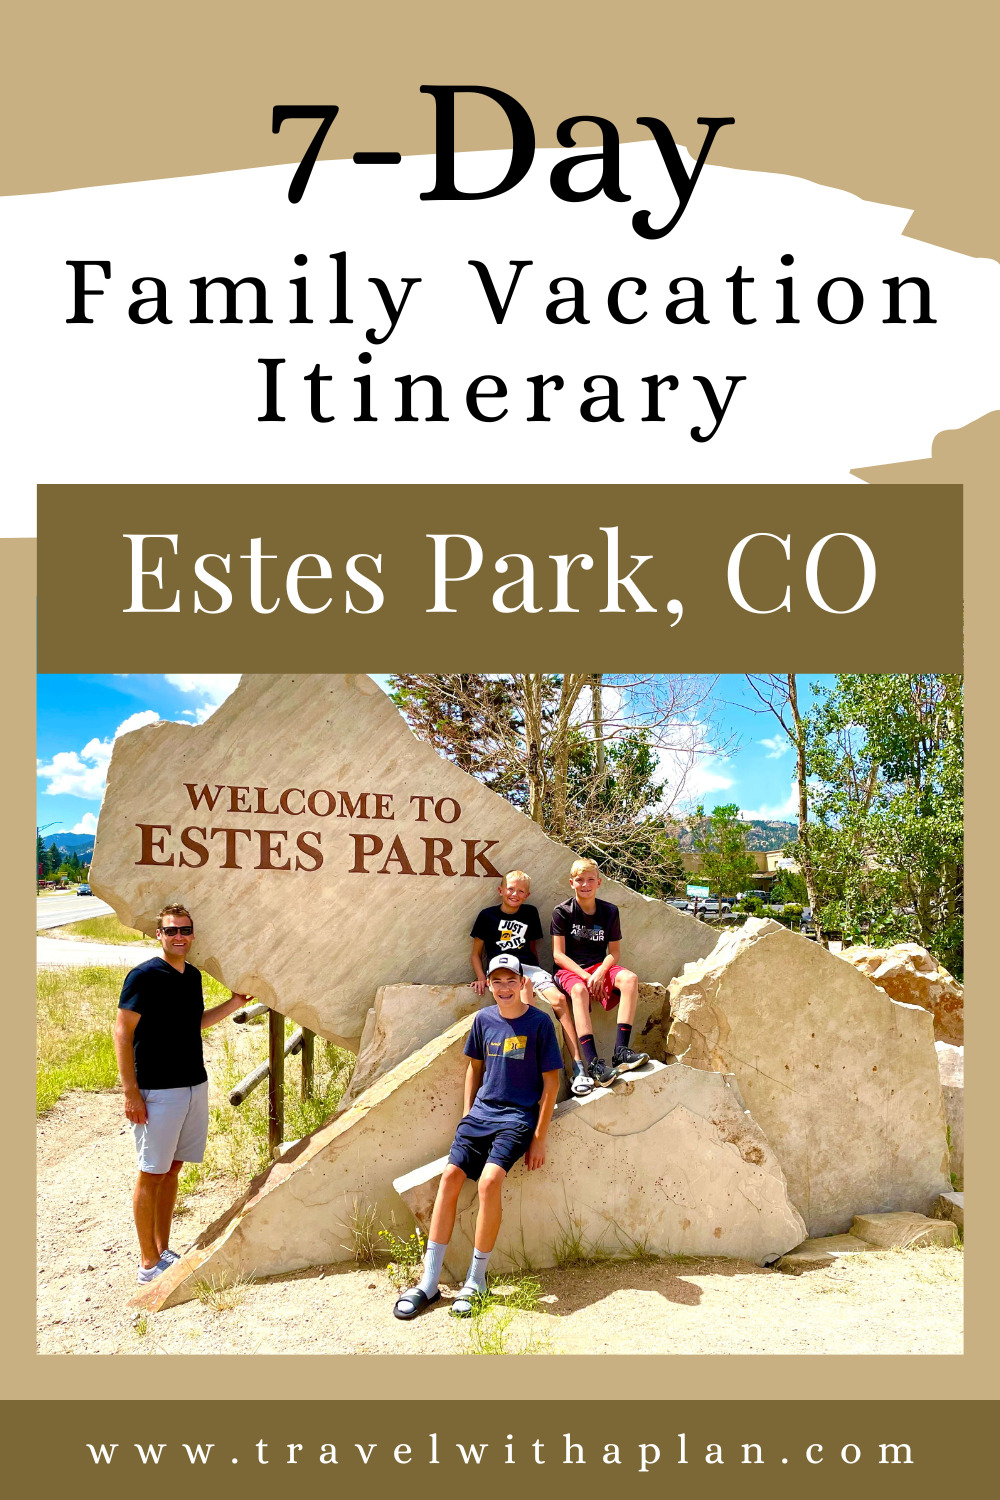 Get our complete guide to visiting Estes Park with kids from top US family travel blog, Travel With A Plan!